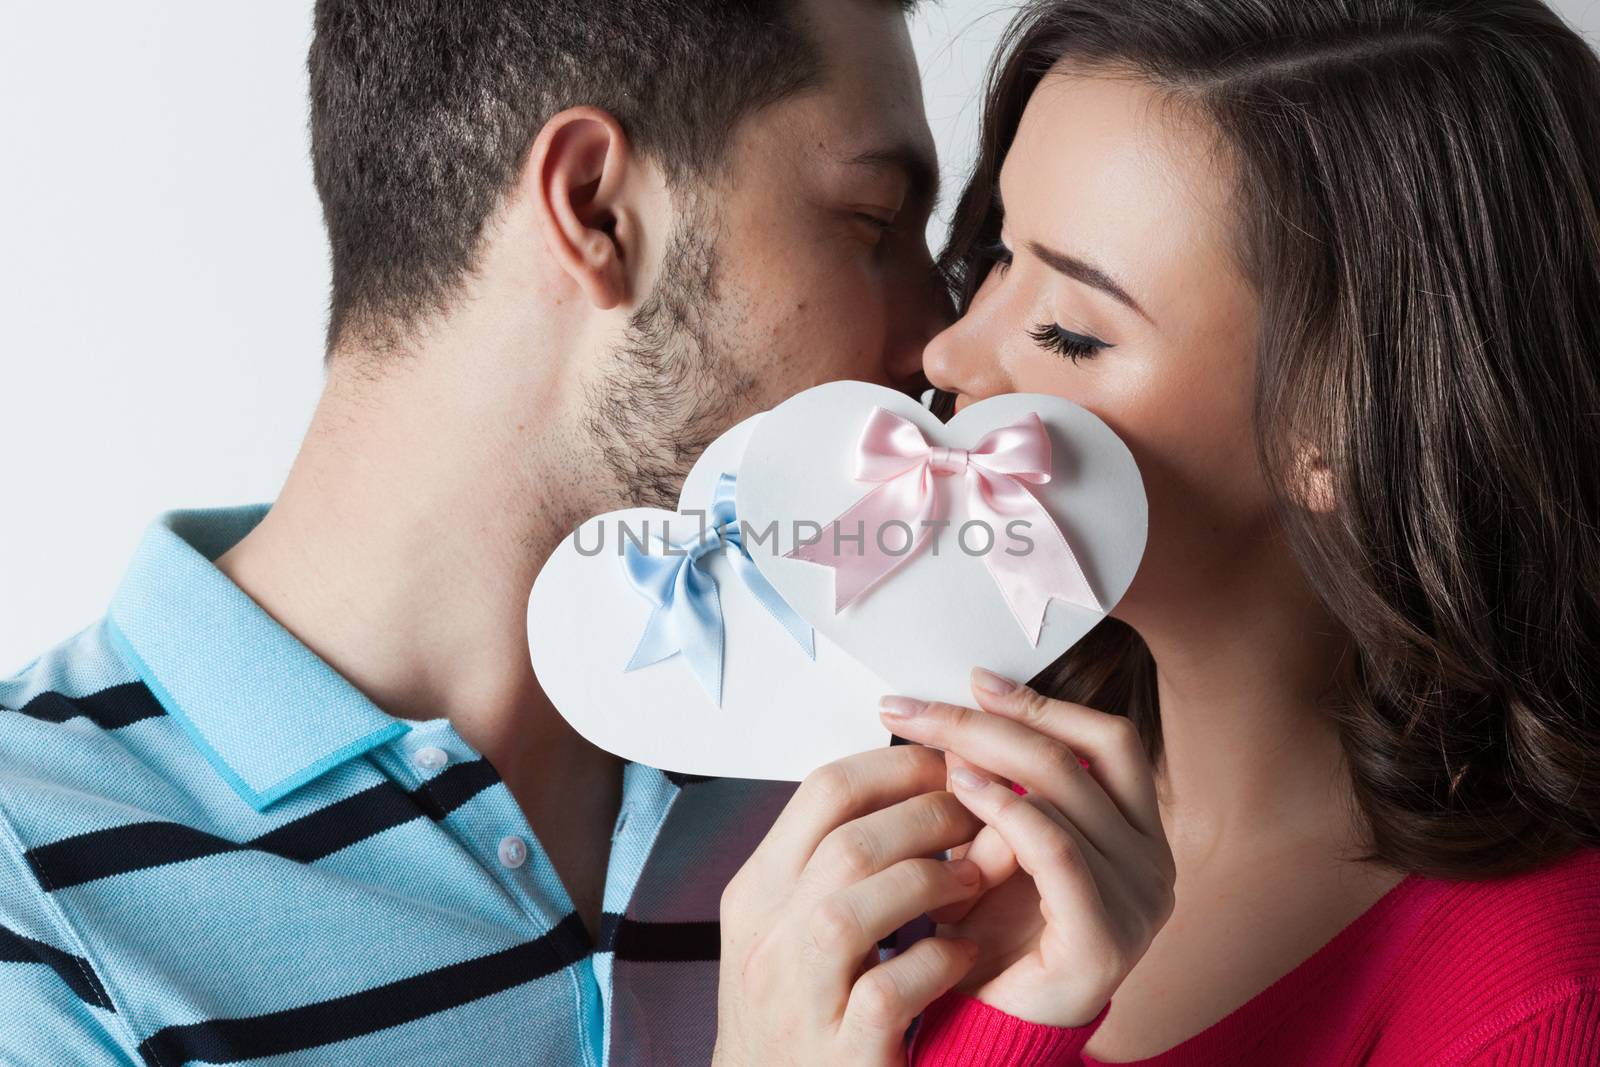 Young couple celebrating Valentine day holding paper heart cards